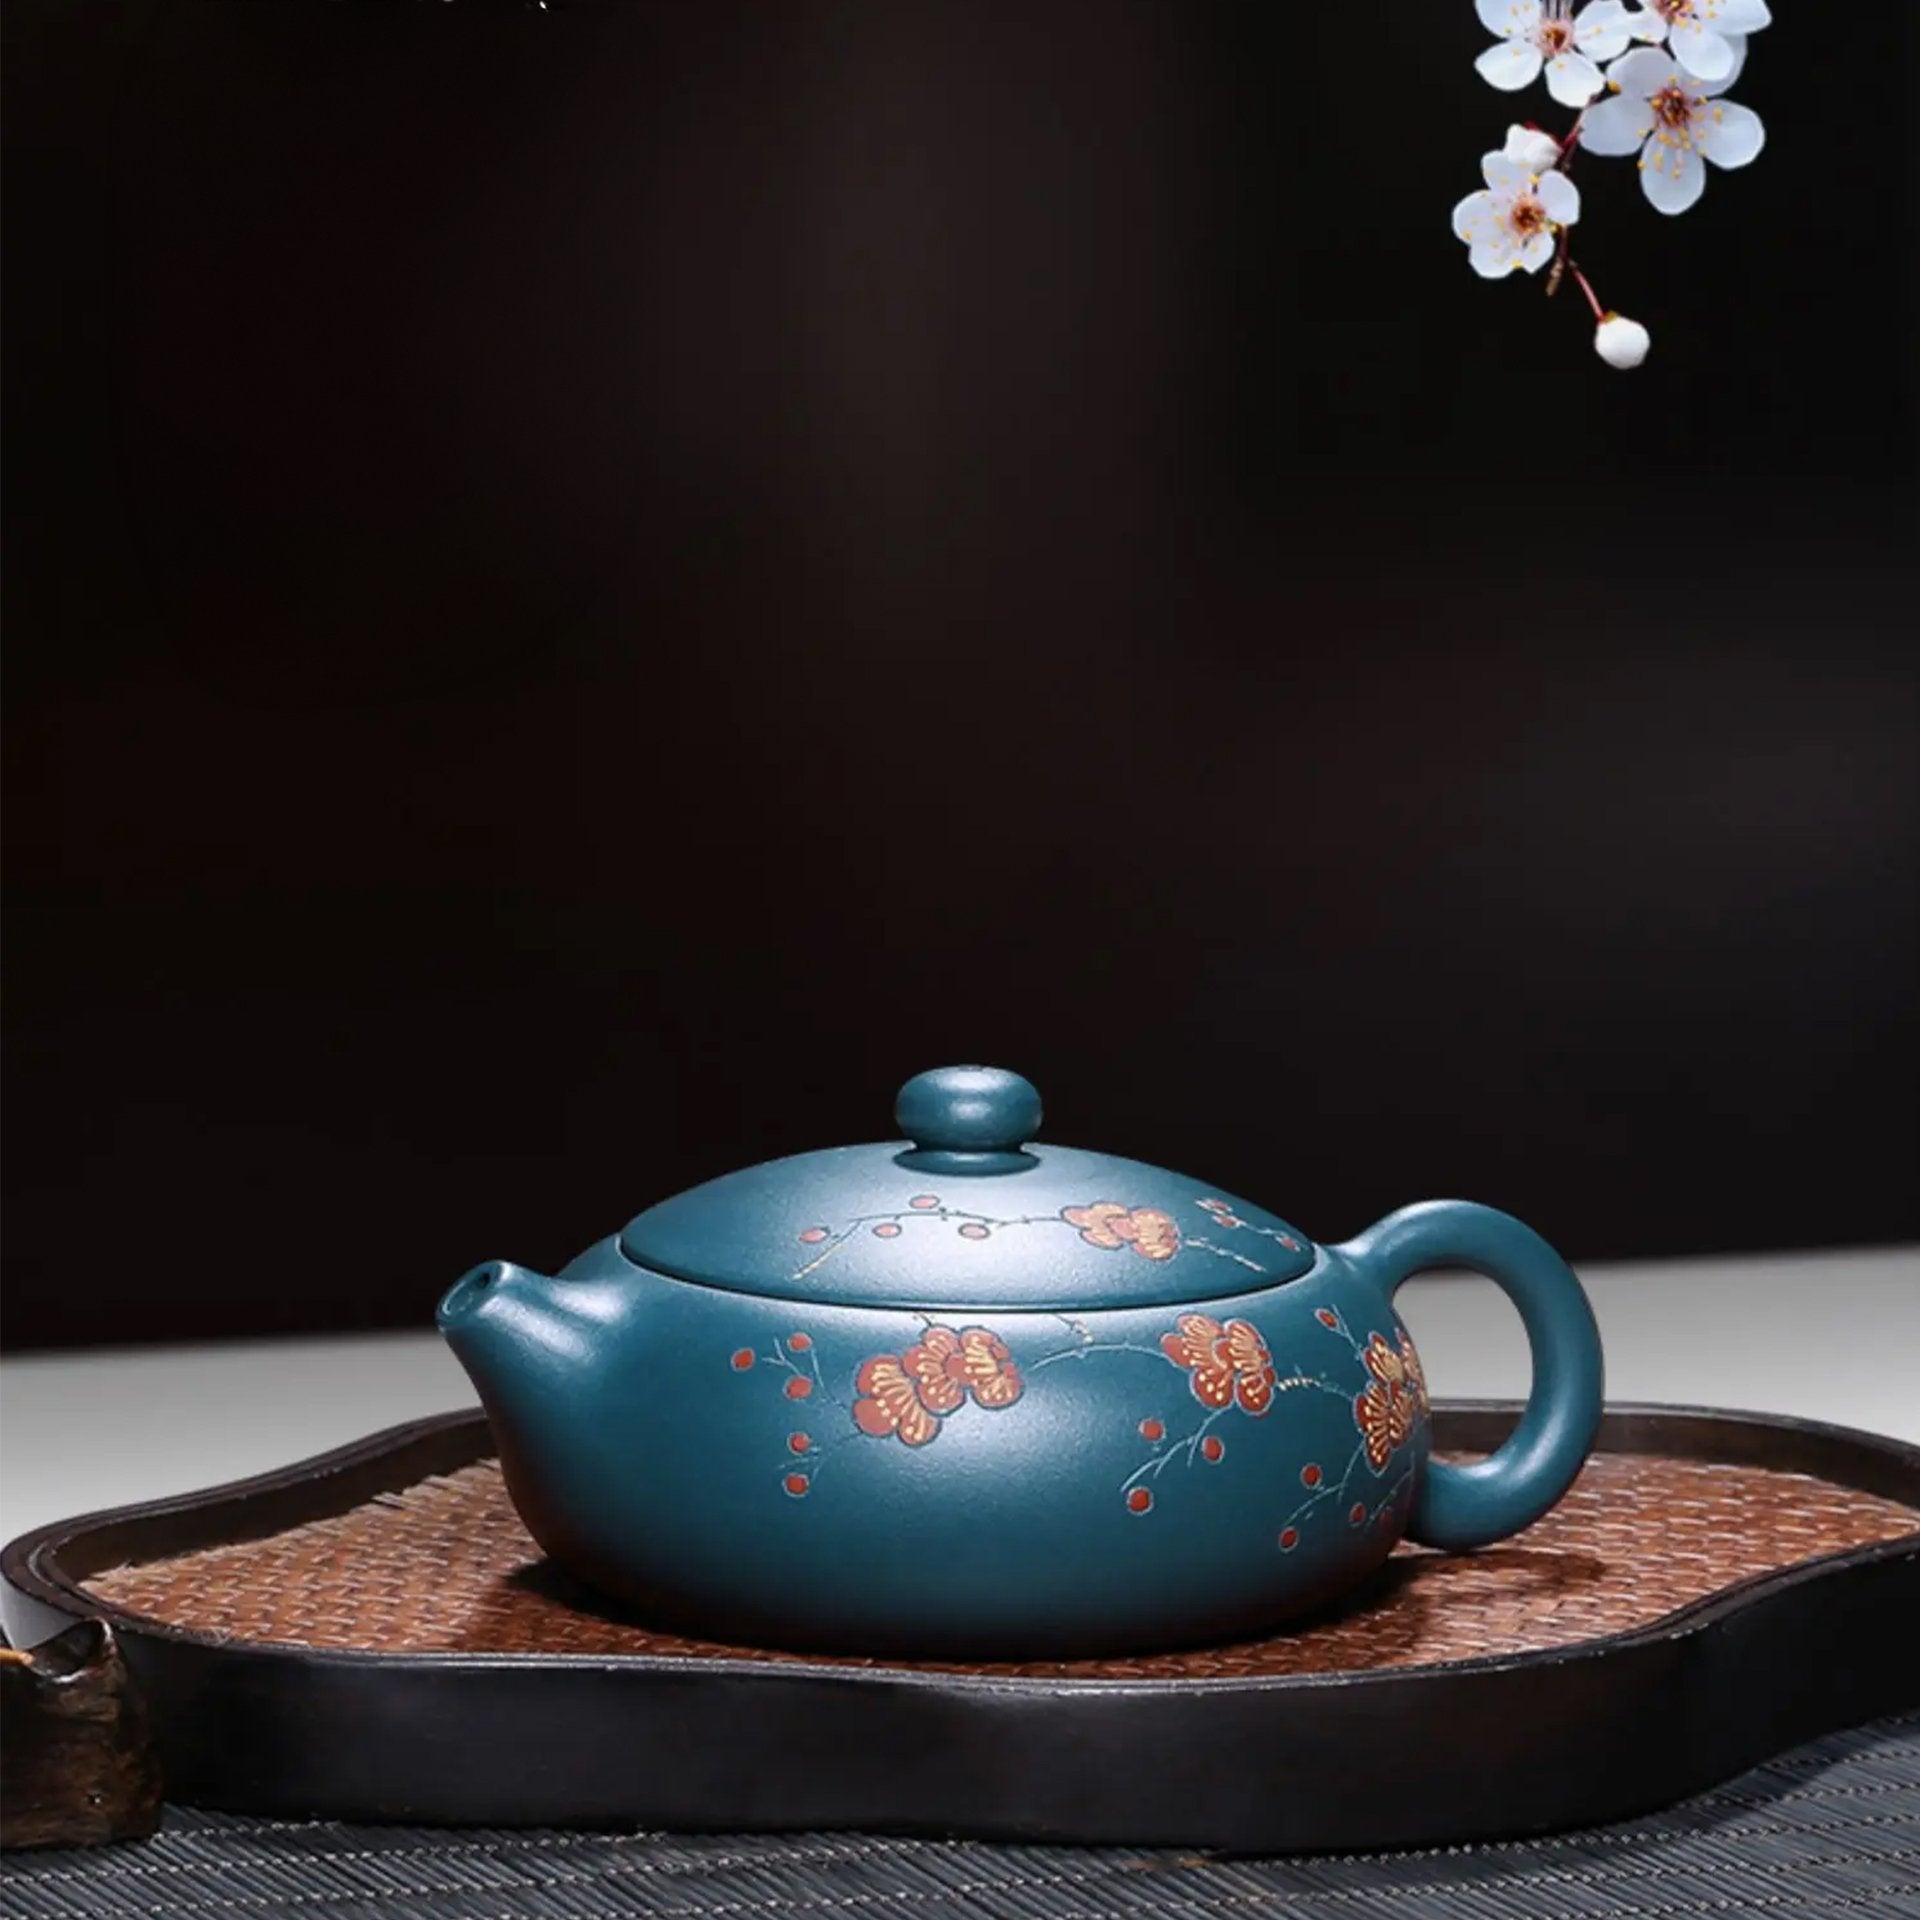 Floral-patterned blue teapot on a tray with a cherry blossom background.